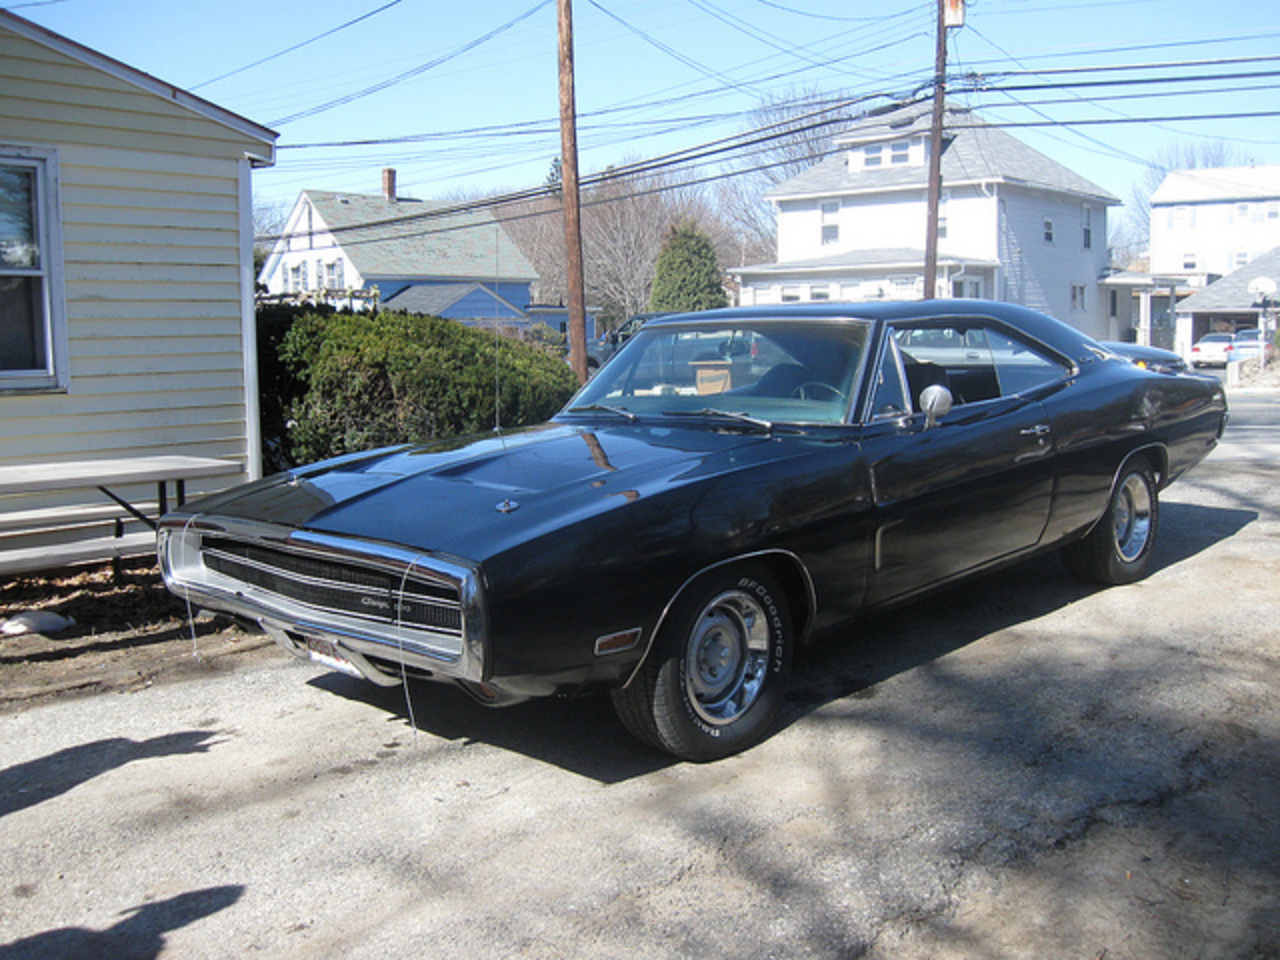 1970 Dodge Charger 500 (4) | Flickr - Photo Sharing!